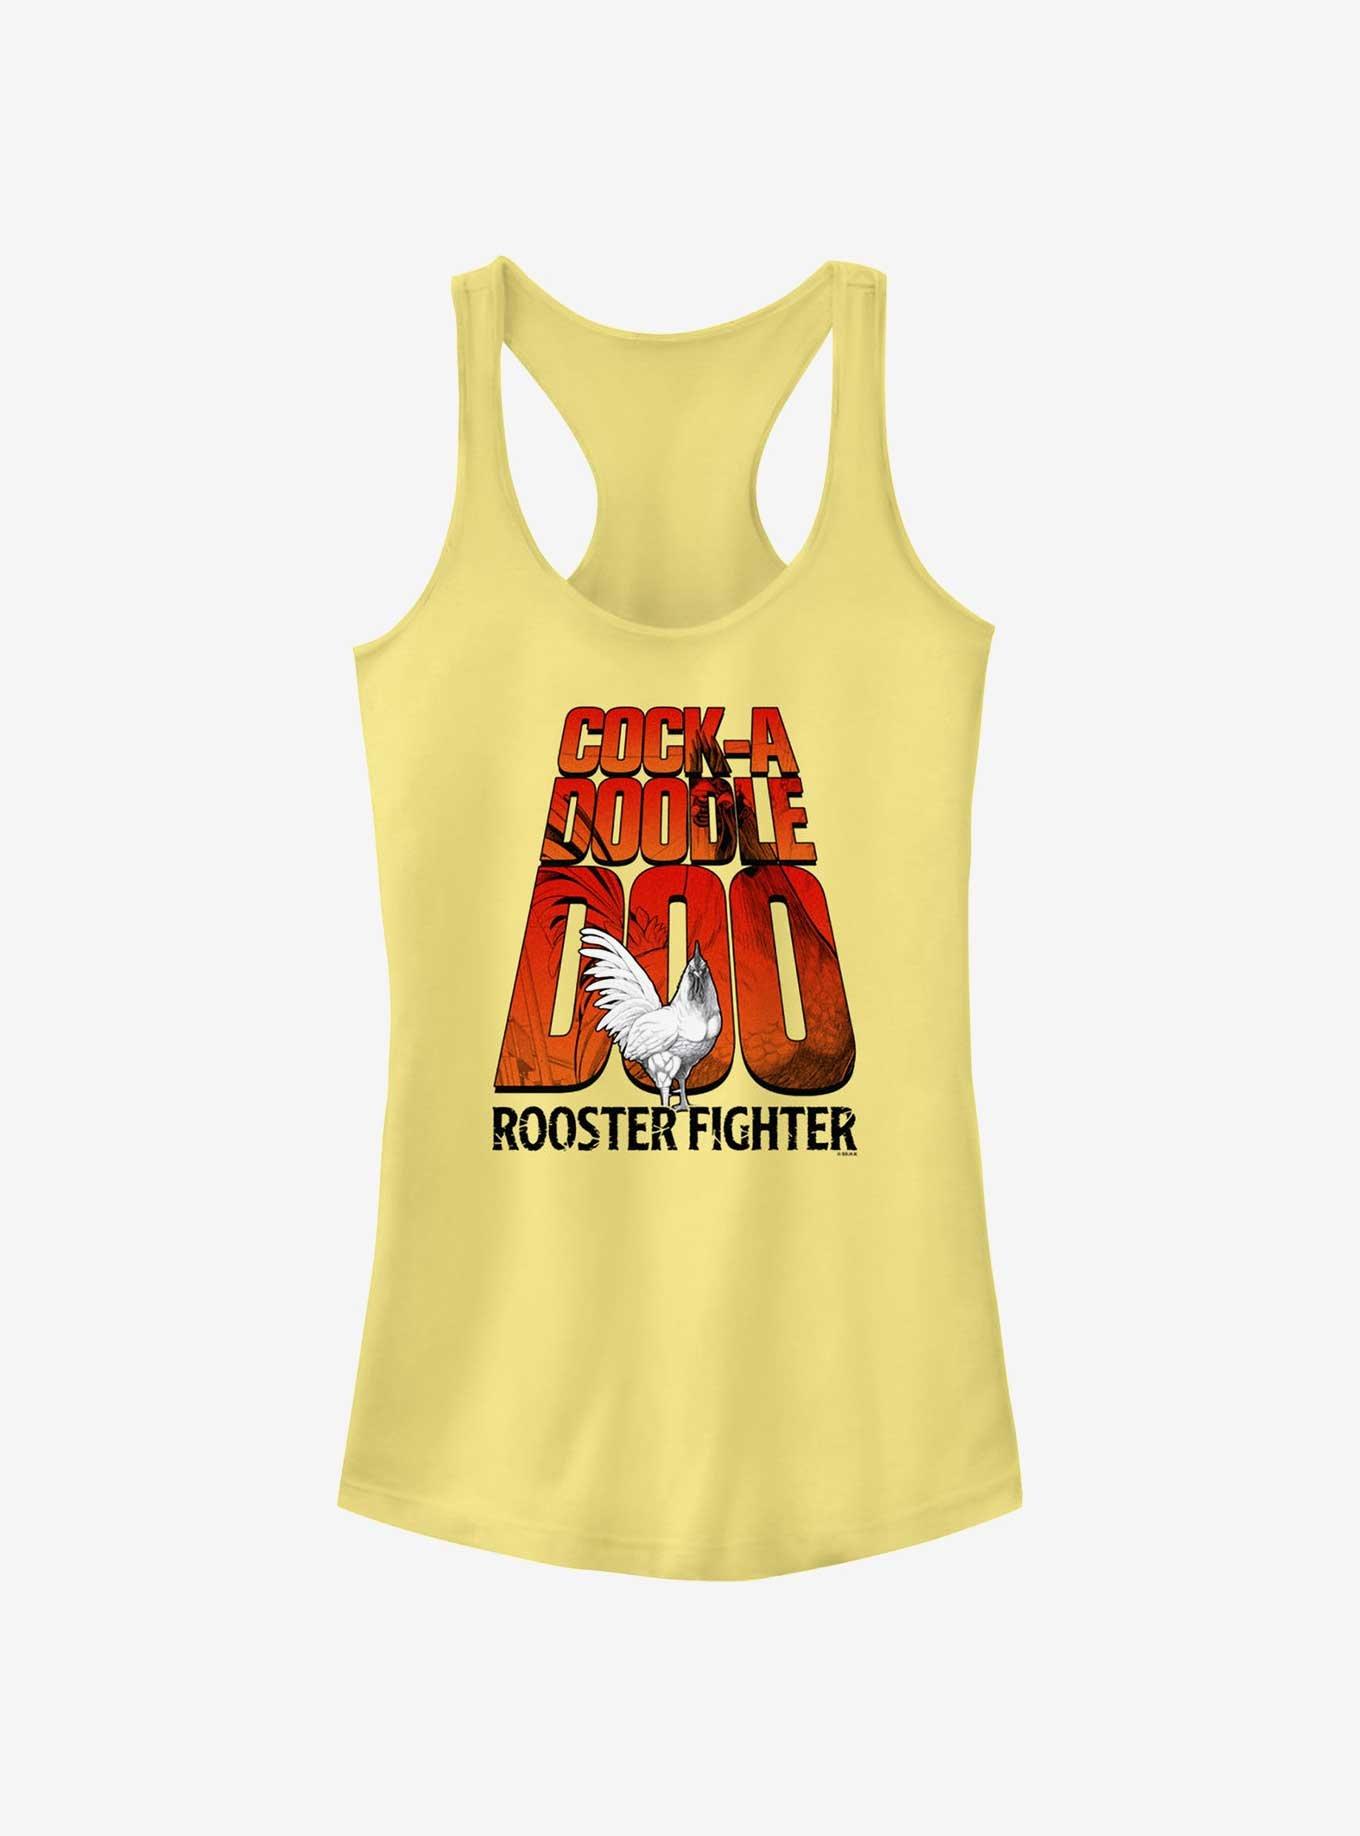 Rooster Fighter Cock-A-Doodle-Doo Logo Girls Tank